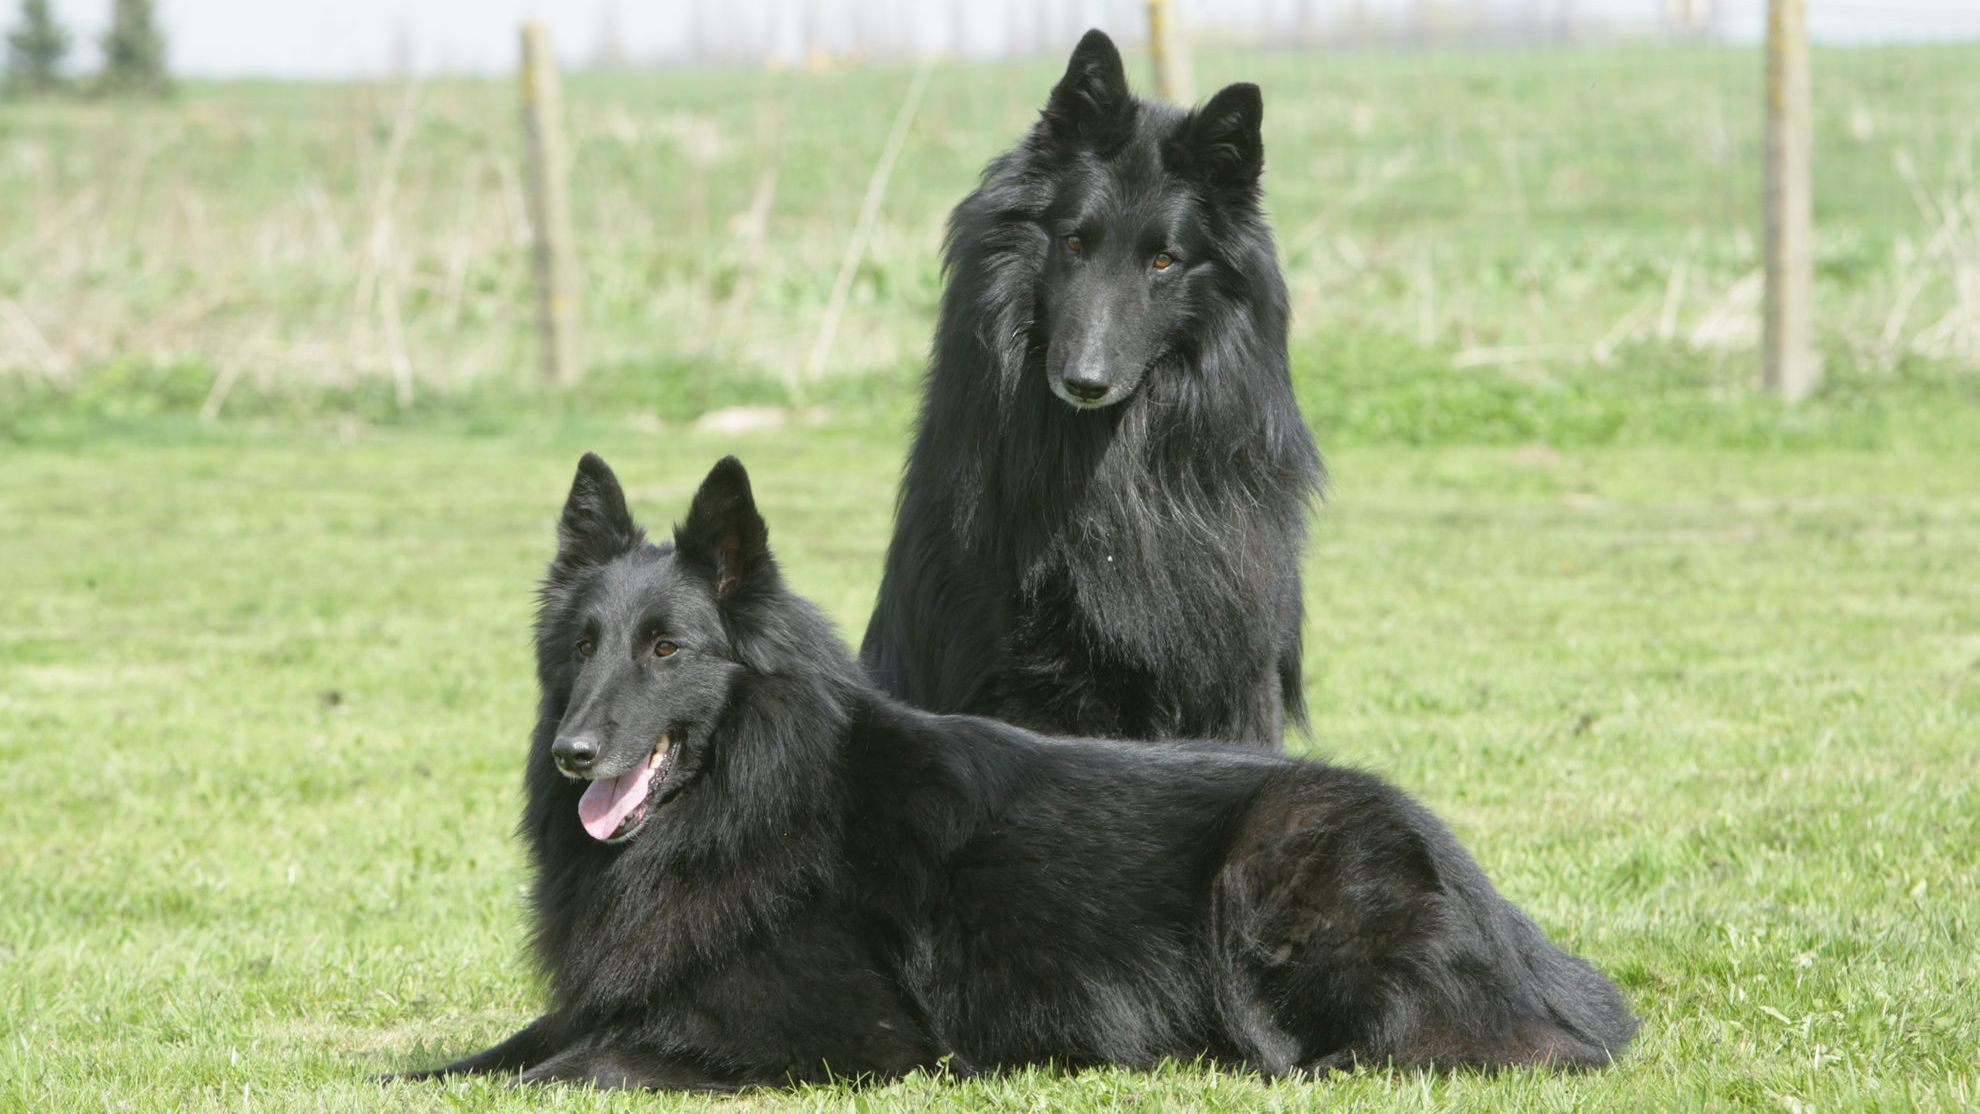 One black Belgian Shepherd sitting behind another lying down on grass